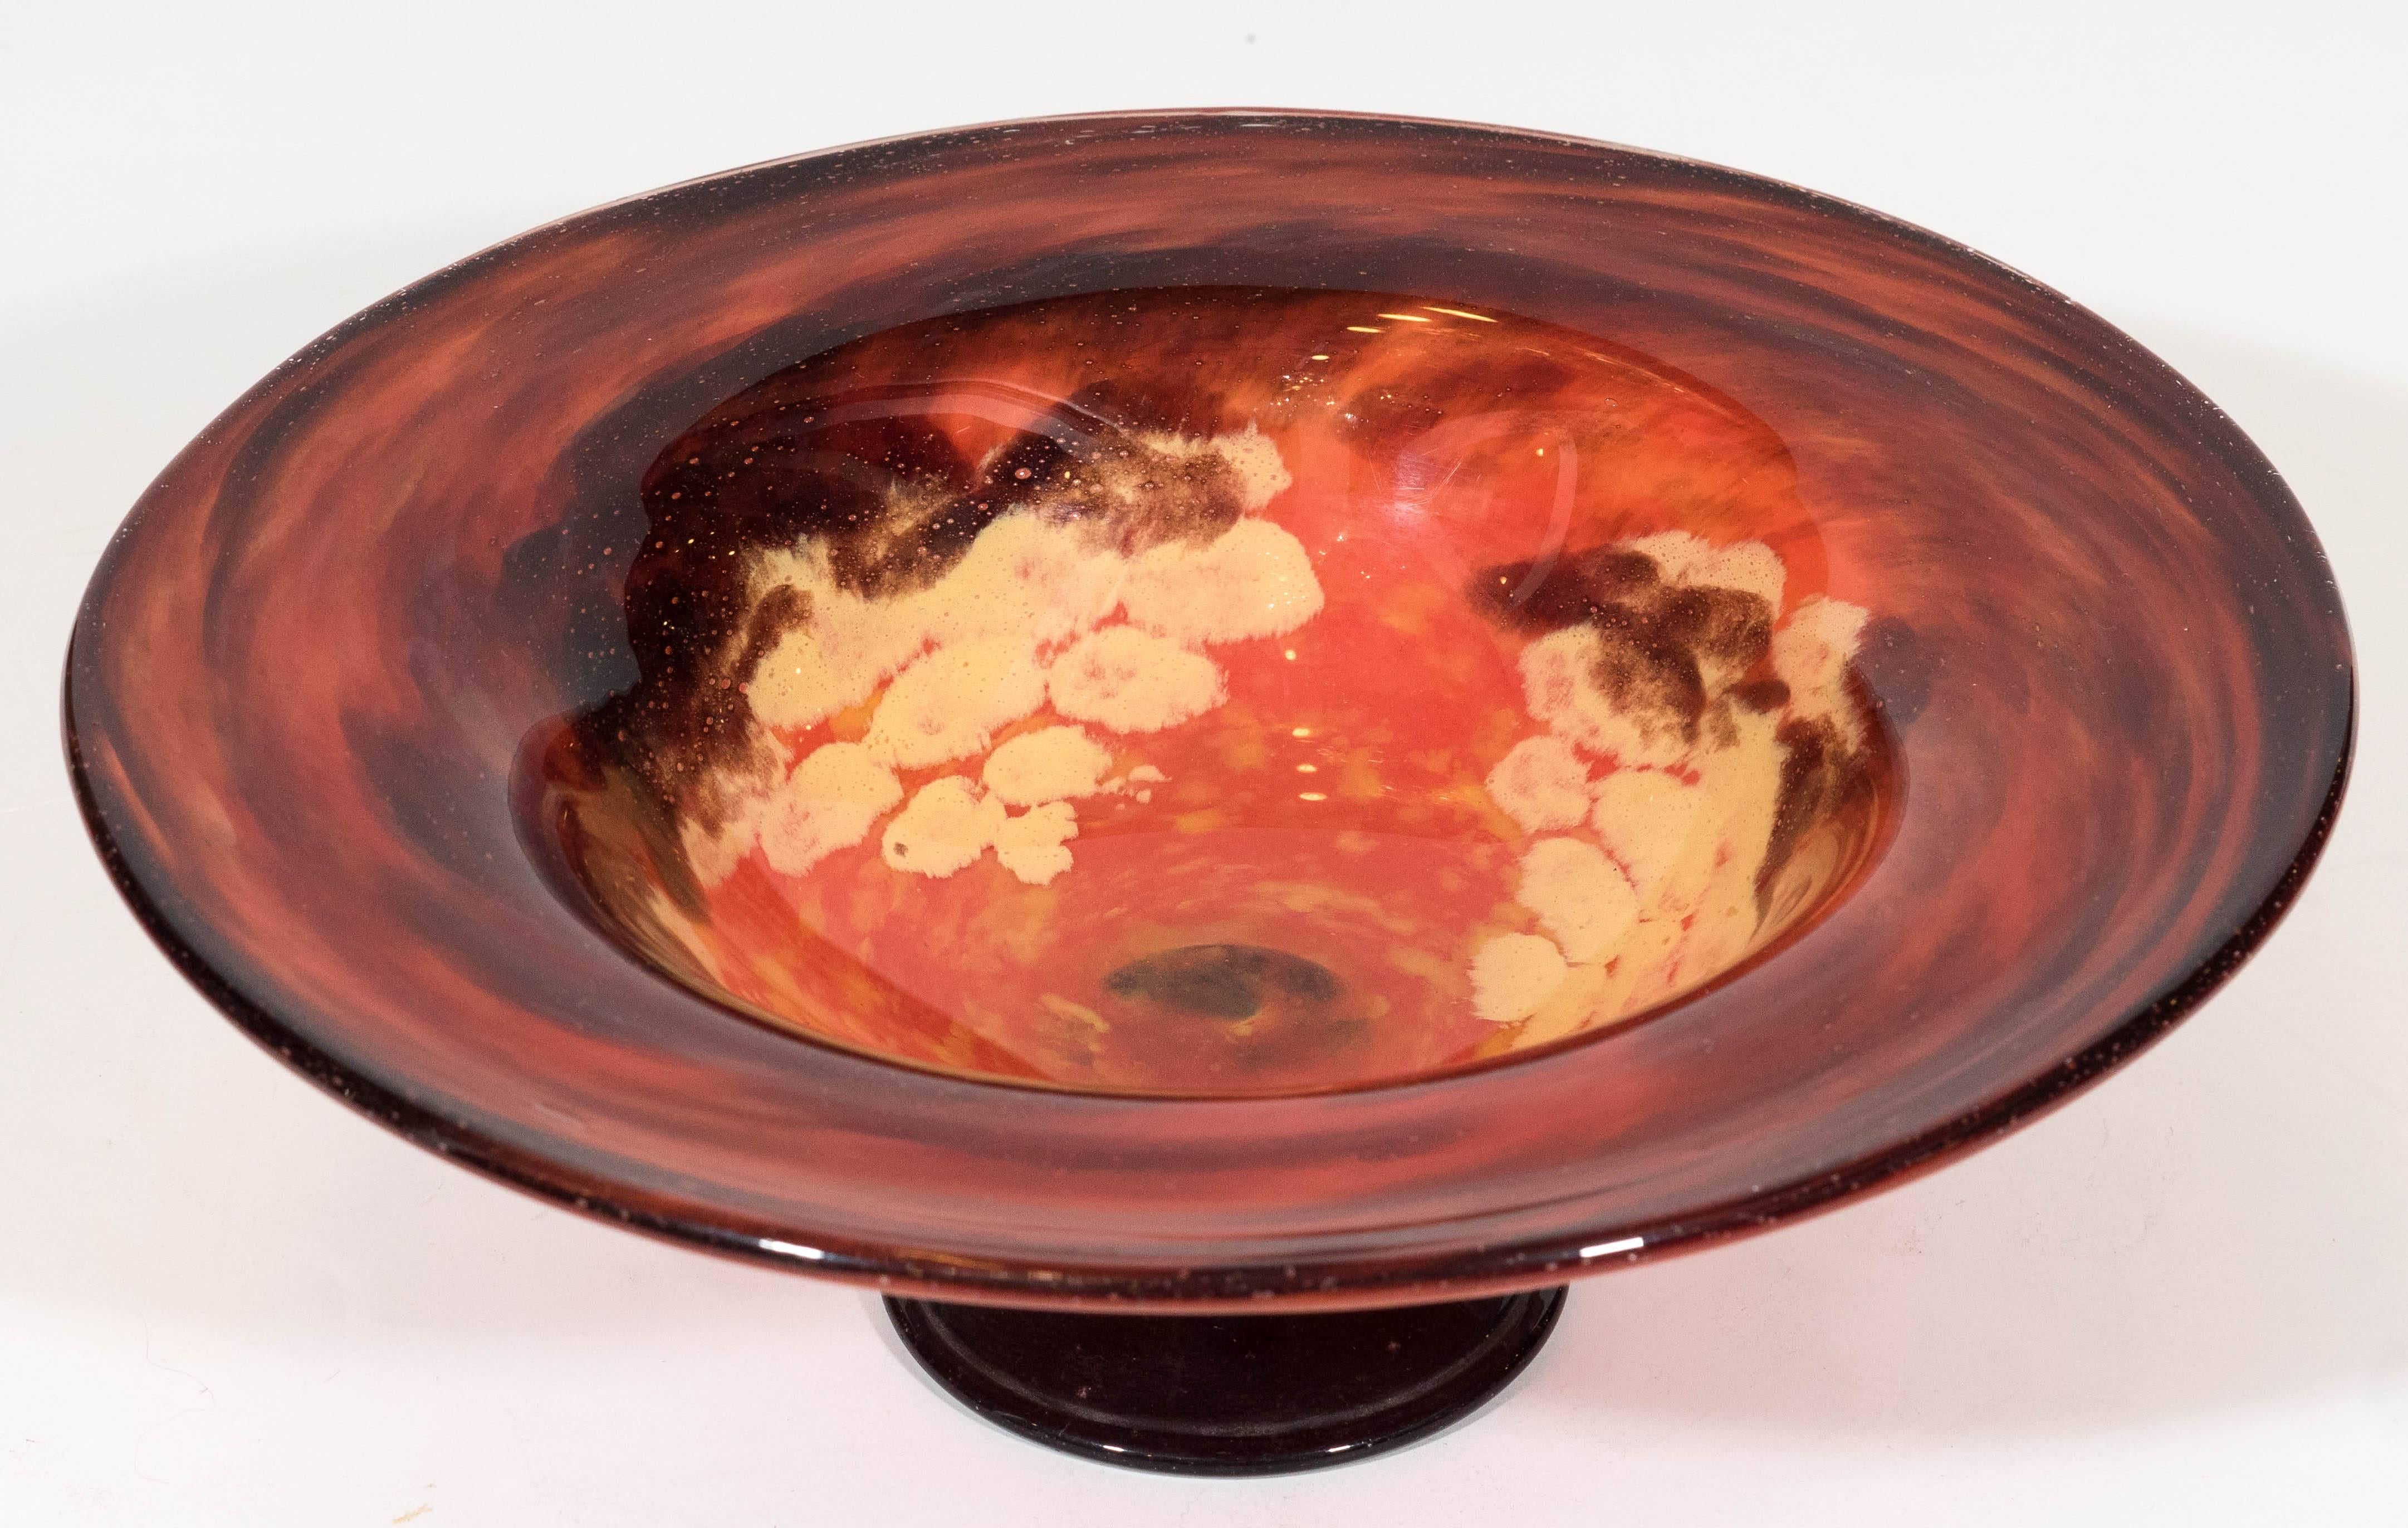 A vintage circa 1930s-1940s French art glass bowl, produced by Schneider Glass, the convex body, detailed with mottled tones of red, gold and black, on a raised pedestal base in black. Markings include [Schneider], etched to the bottom of the bowl,